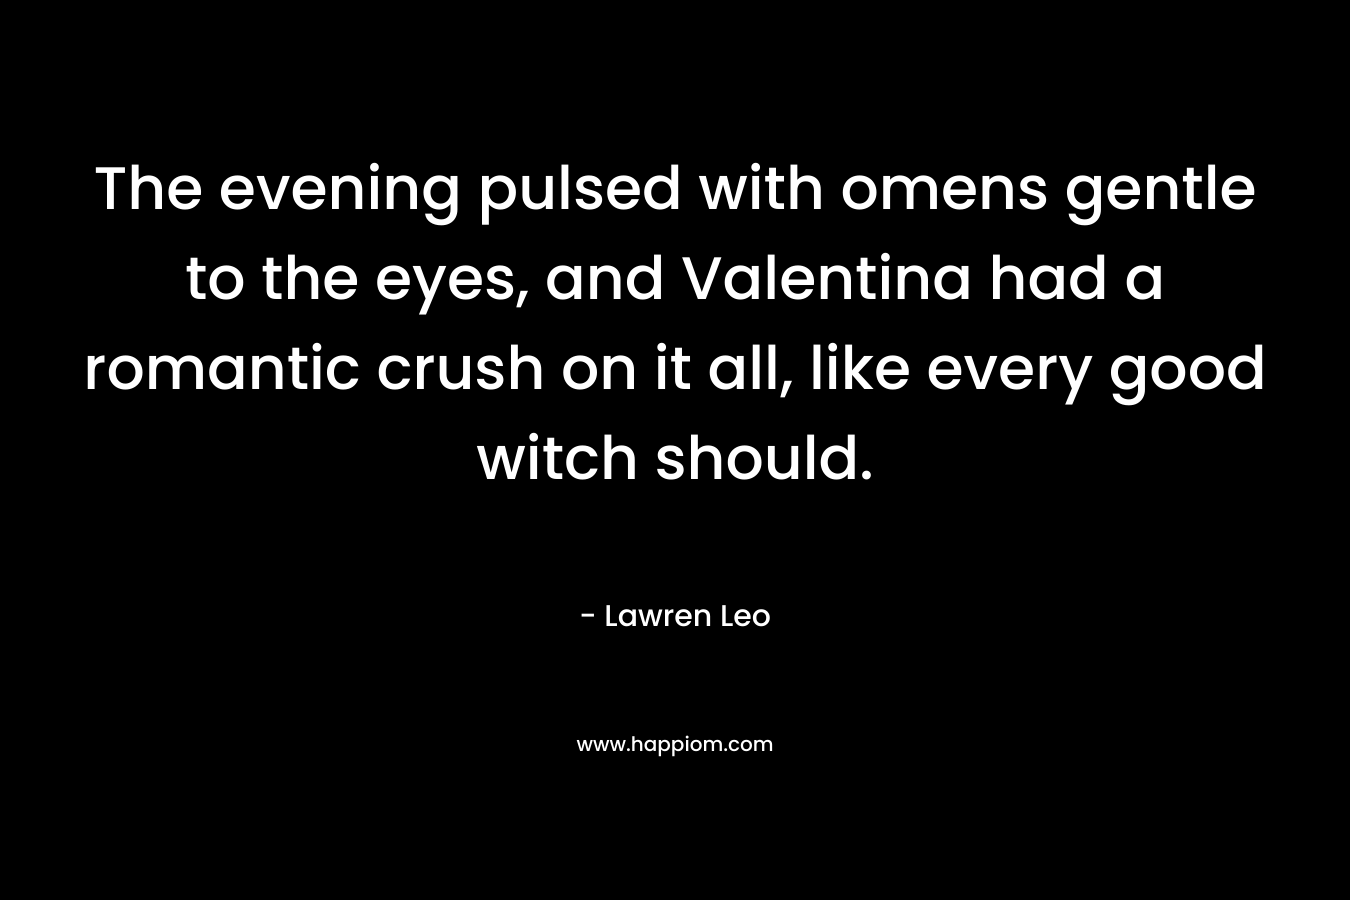 The evening pulsed with omens gentle to the eyes, and Valentina had a romantic crush on it all, like every good witch should. – Lawren Leo